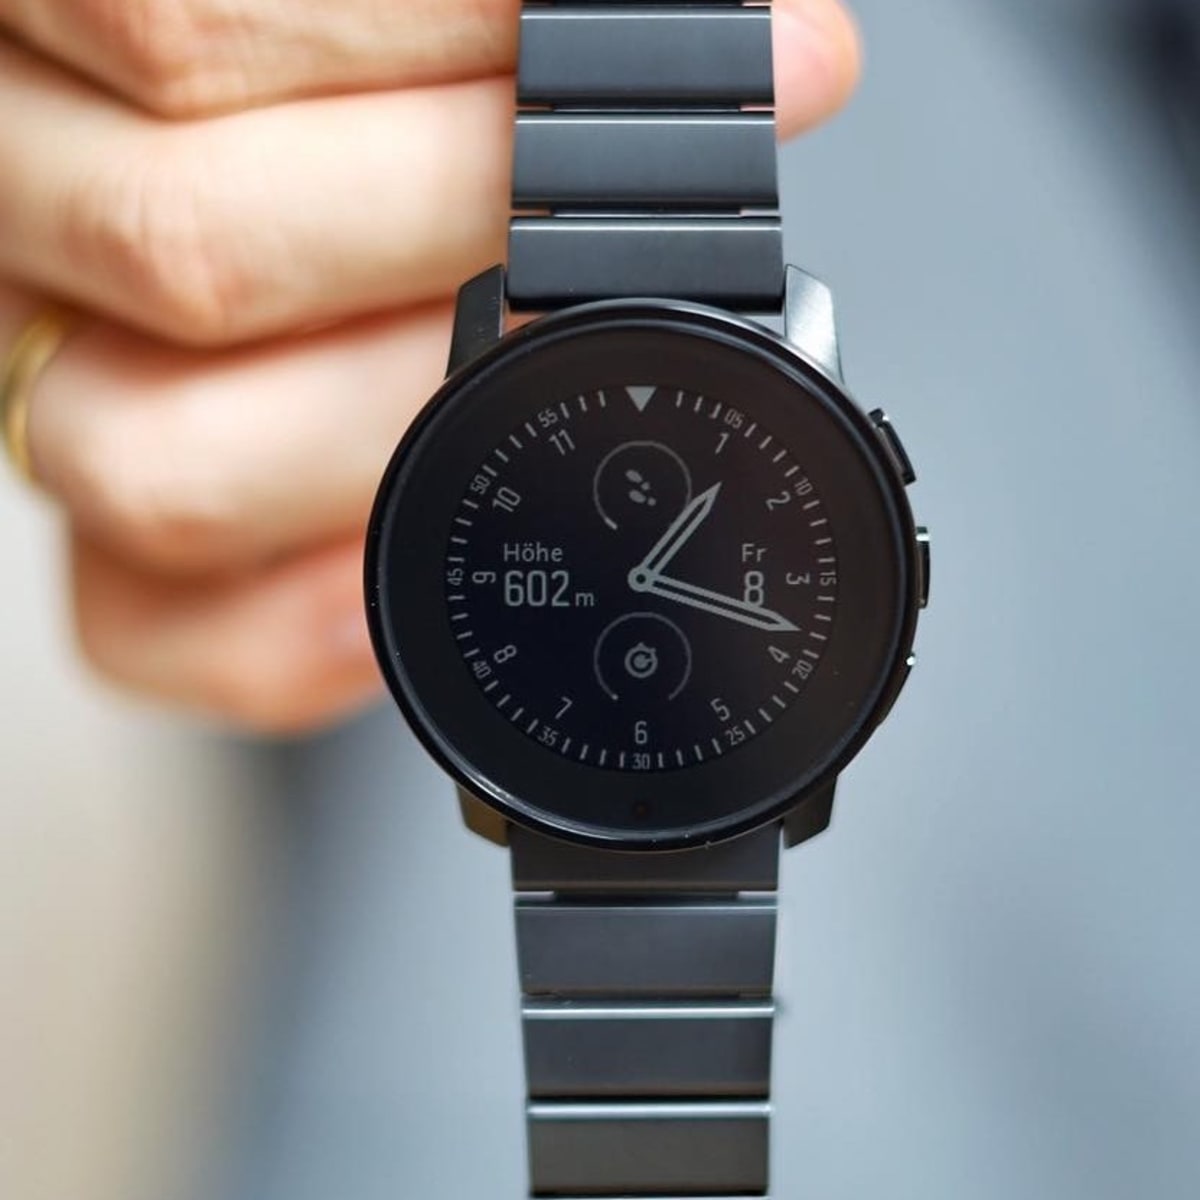 Suunto releases a new version of the Suunto 9 Peak in blacked-out